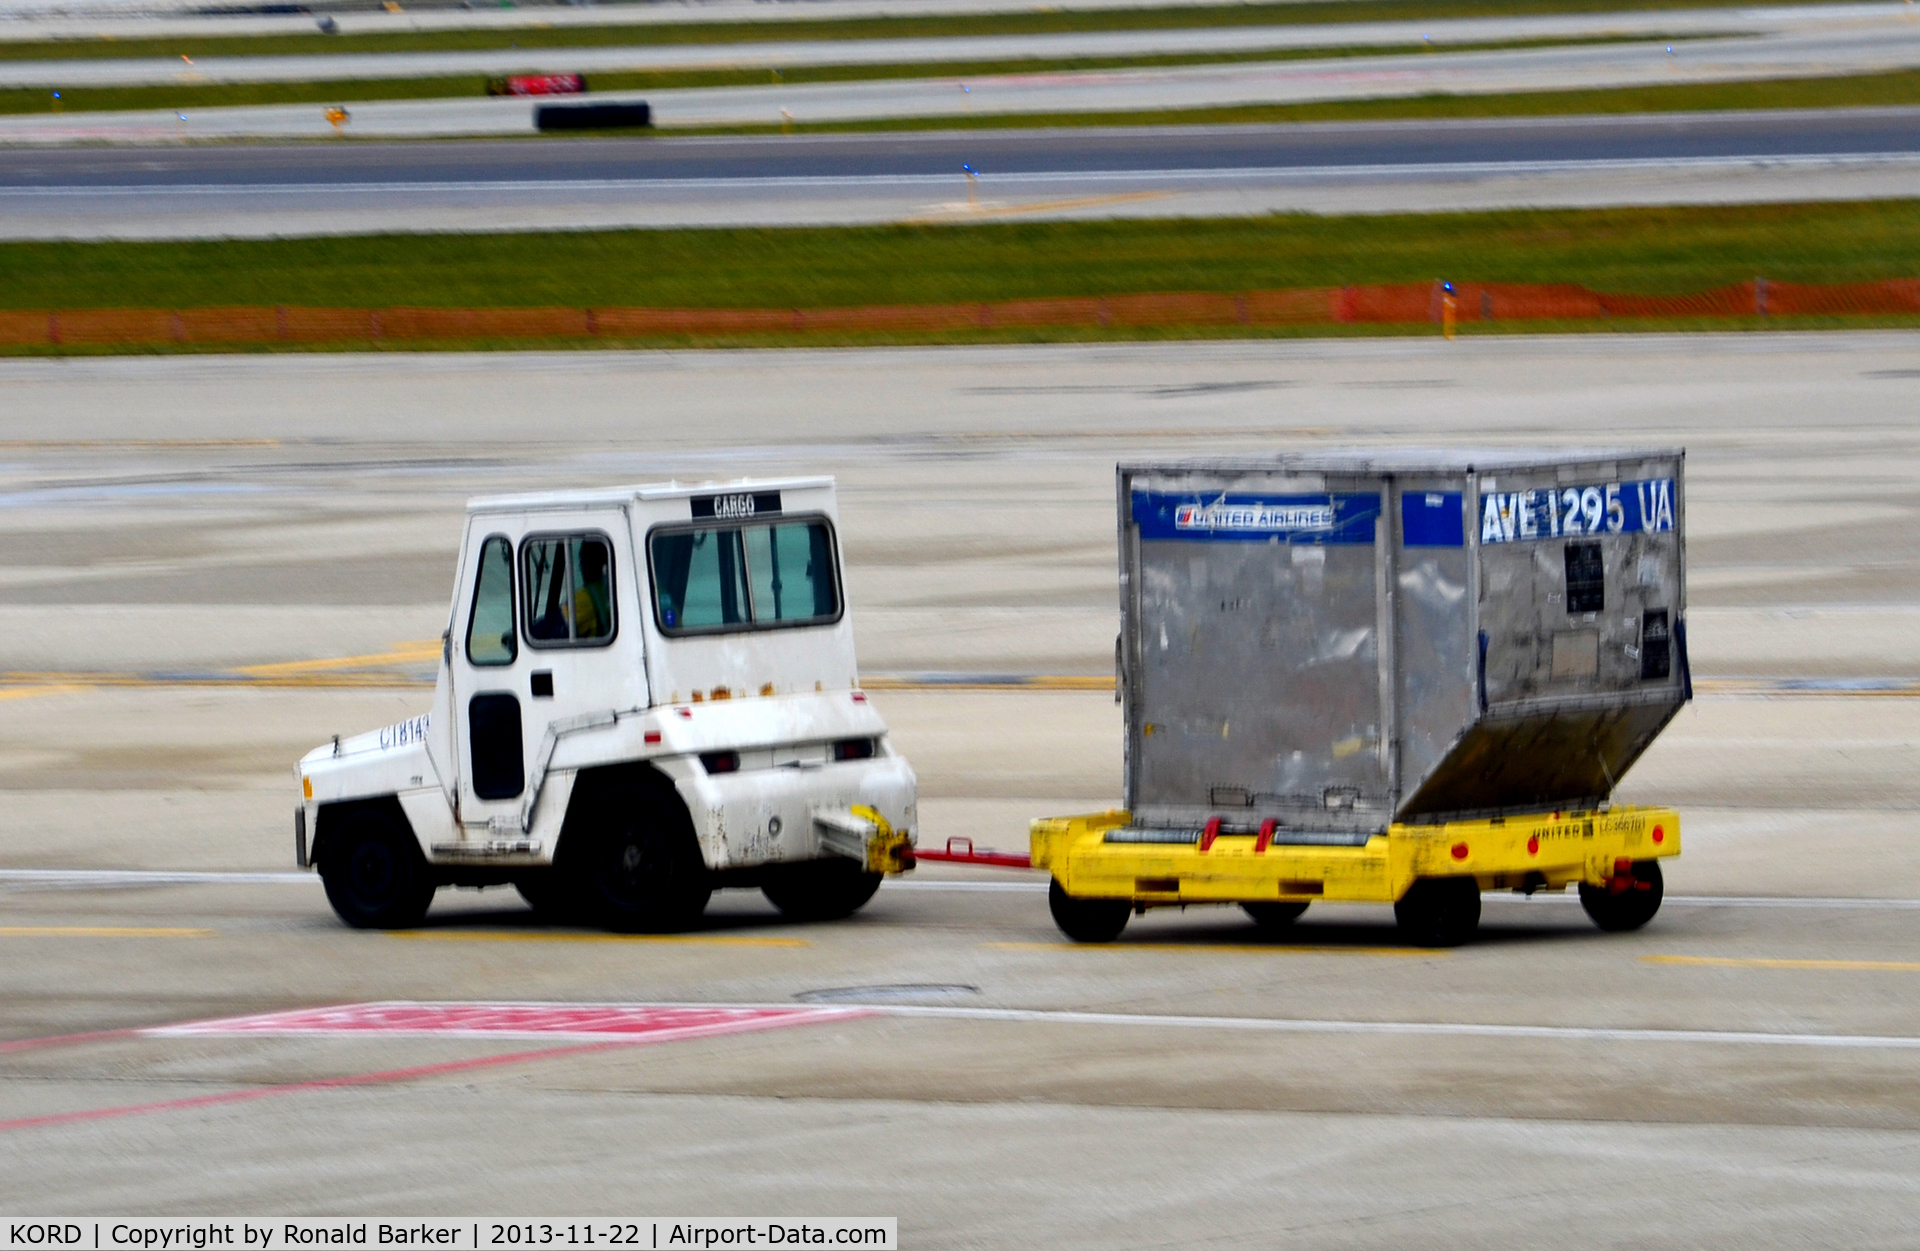 Chicago O'hare International Airport (ORD) - Tug pulling cargo container O'Hare